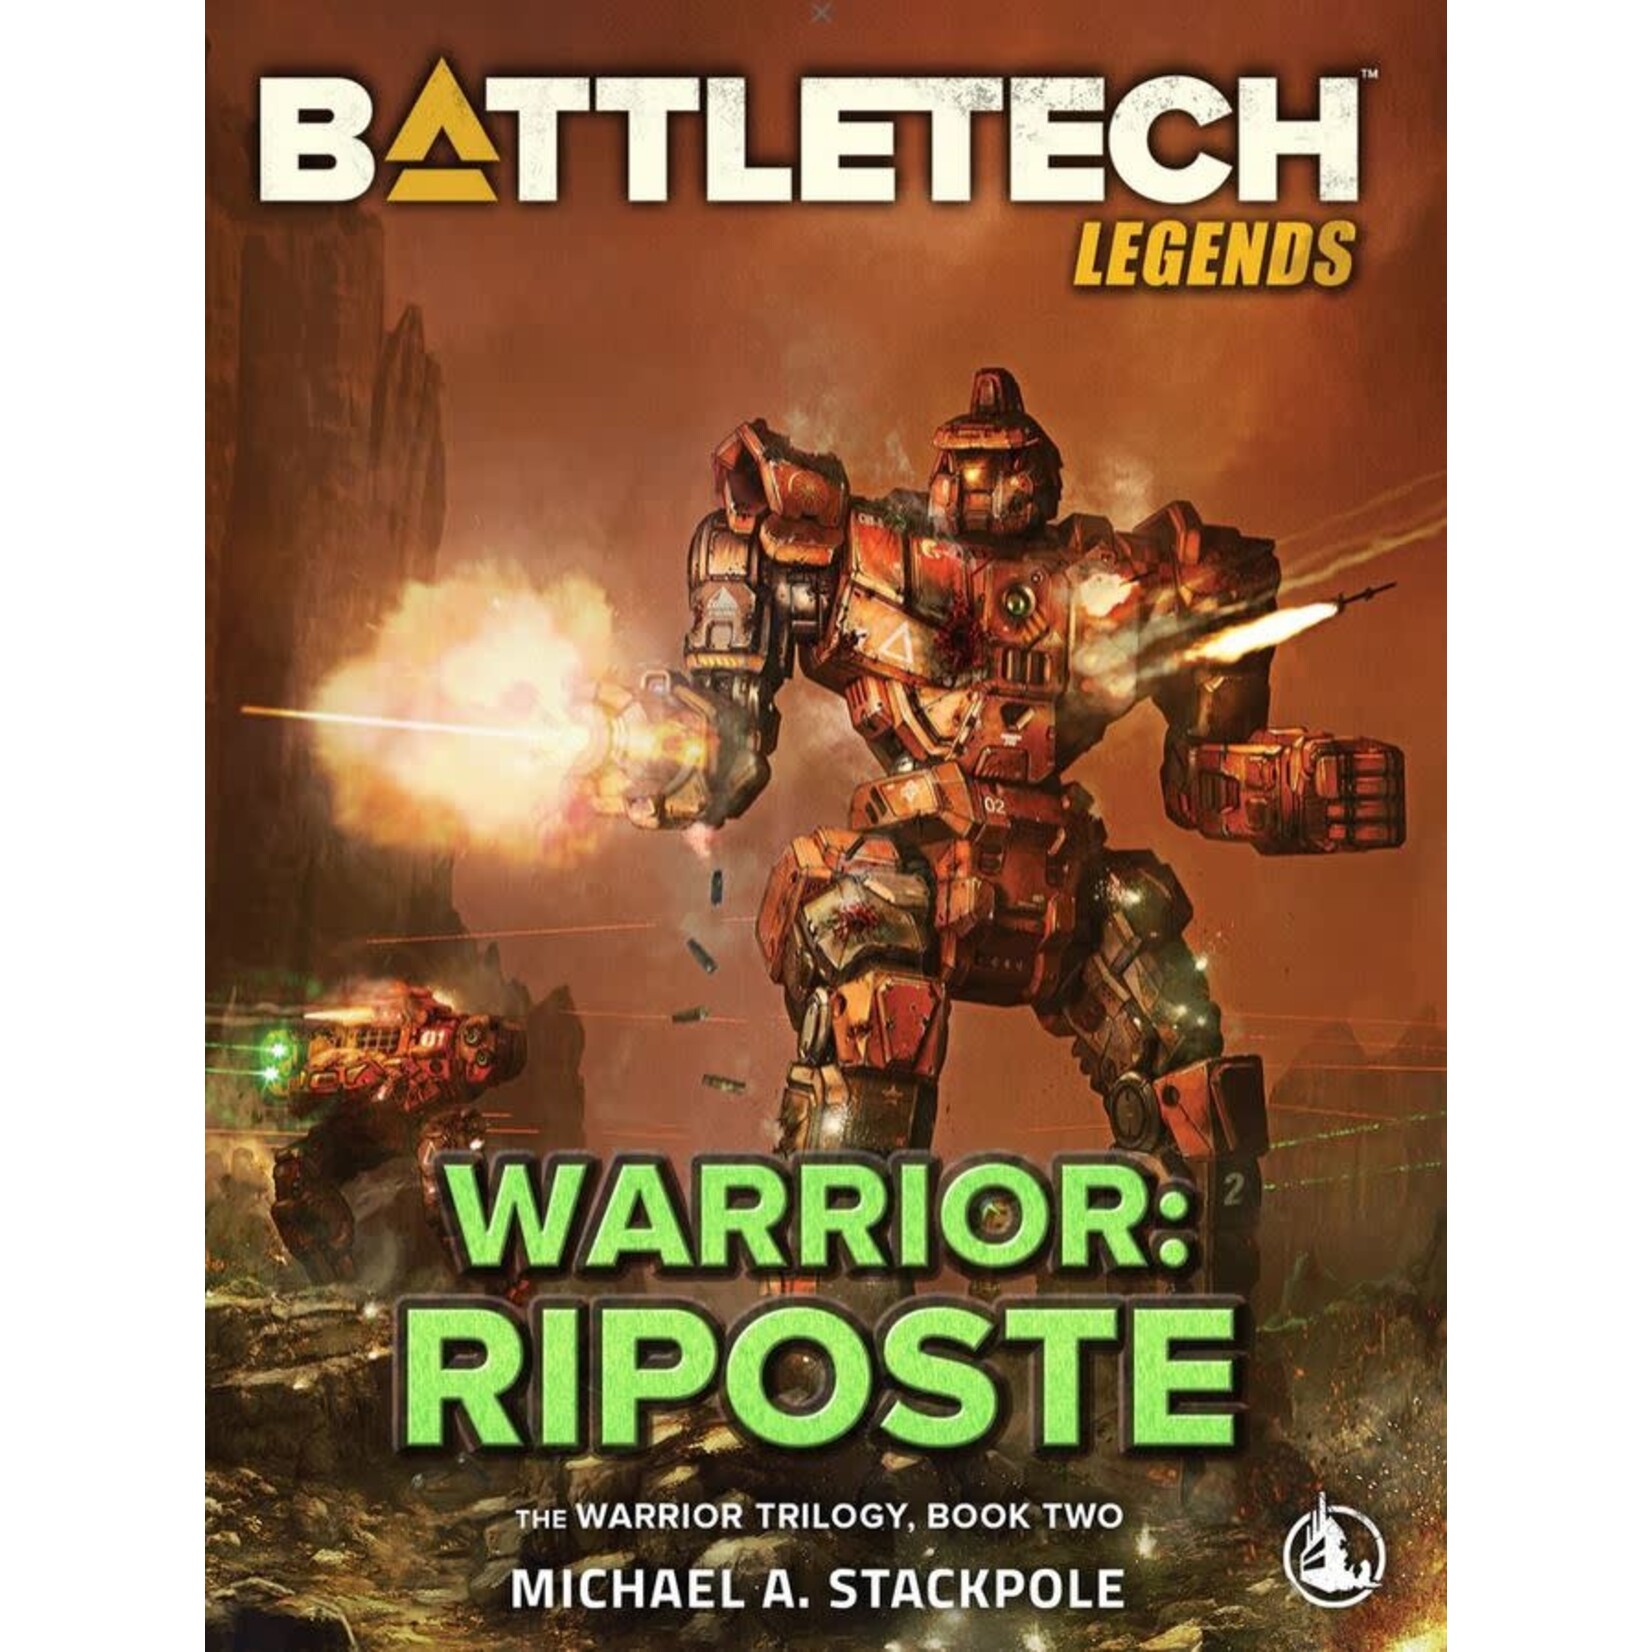 BattleTech: The Warrior Trilogy - Book Two Riposte (Hardcover) (Preorder)